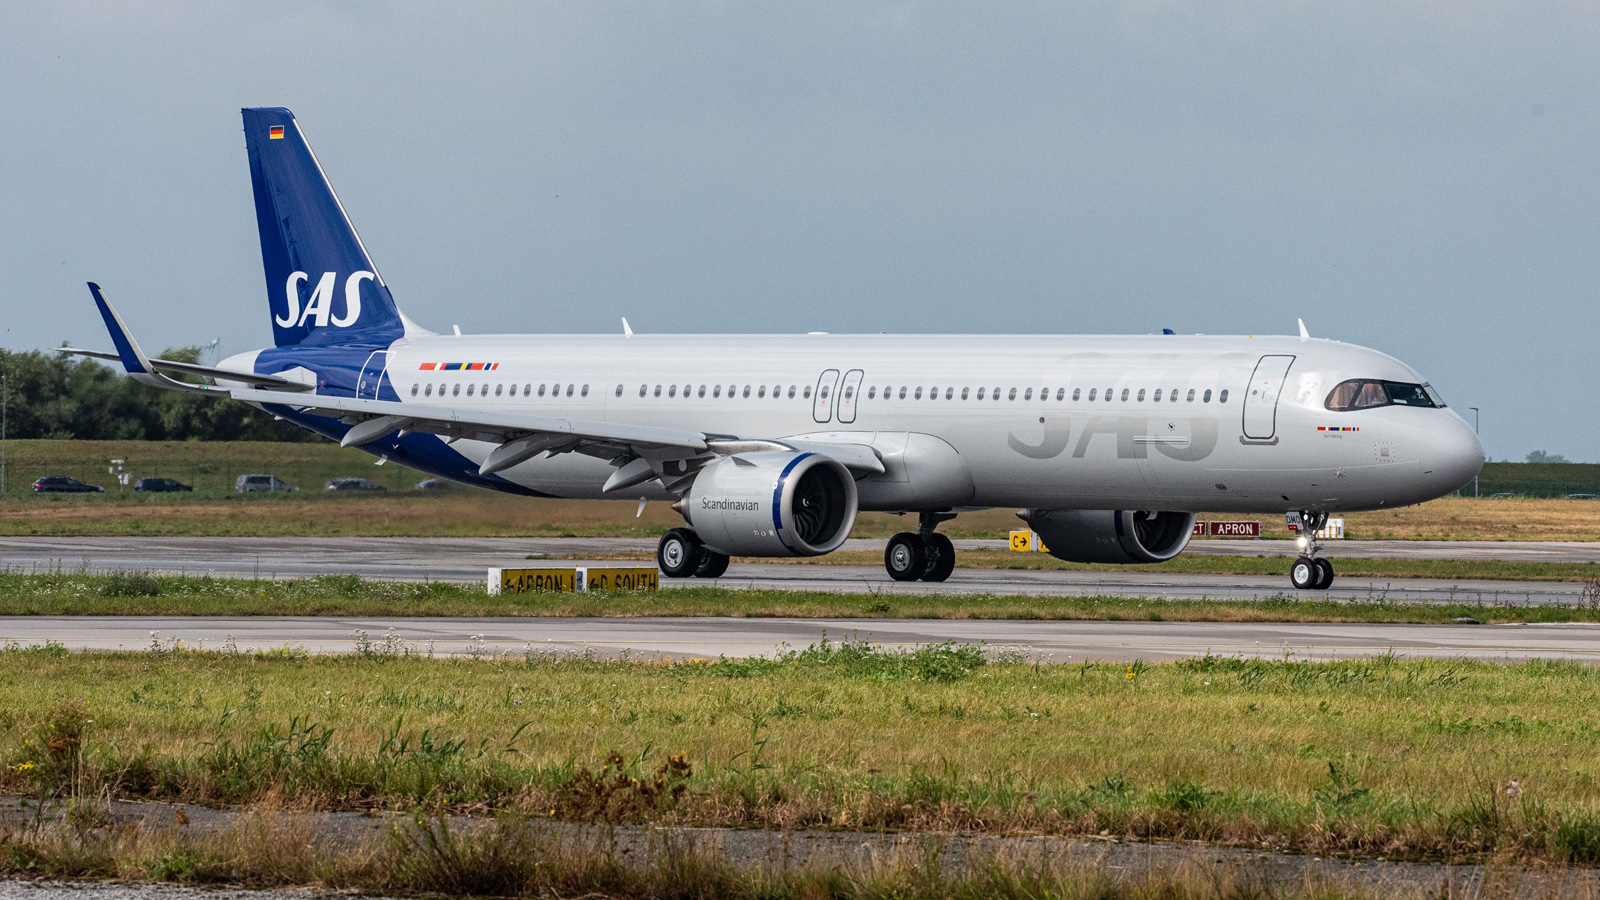 SAS takes delivery of its first Airbus A321neoLR